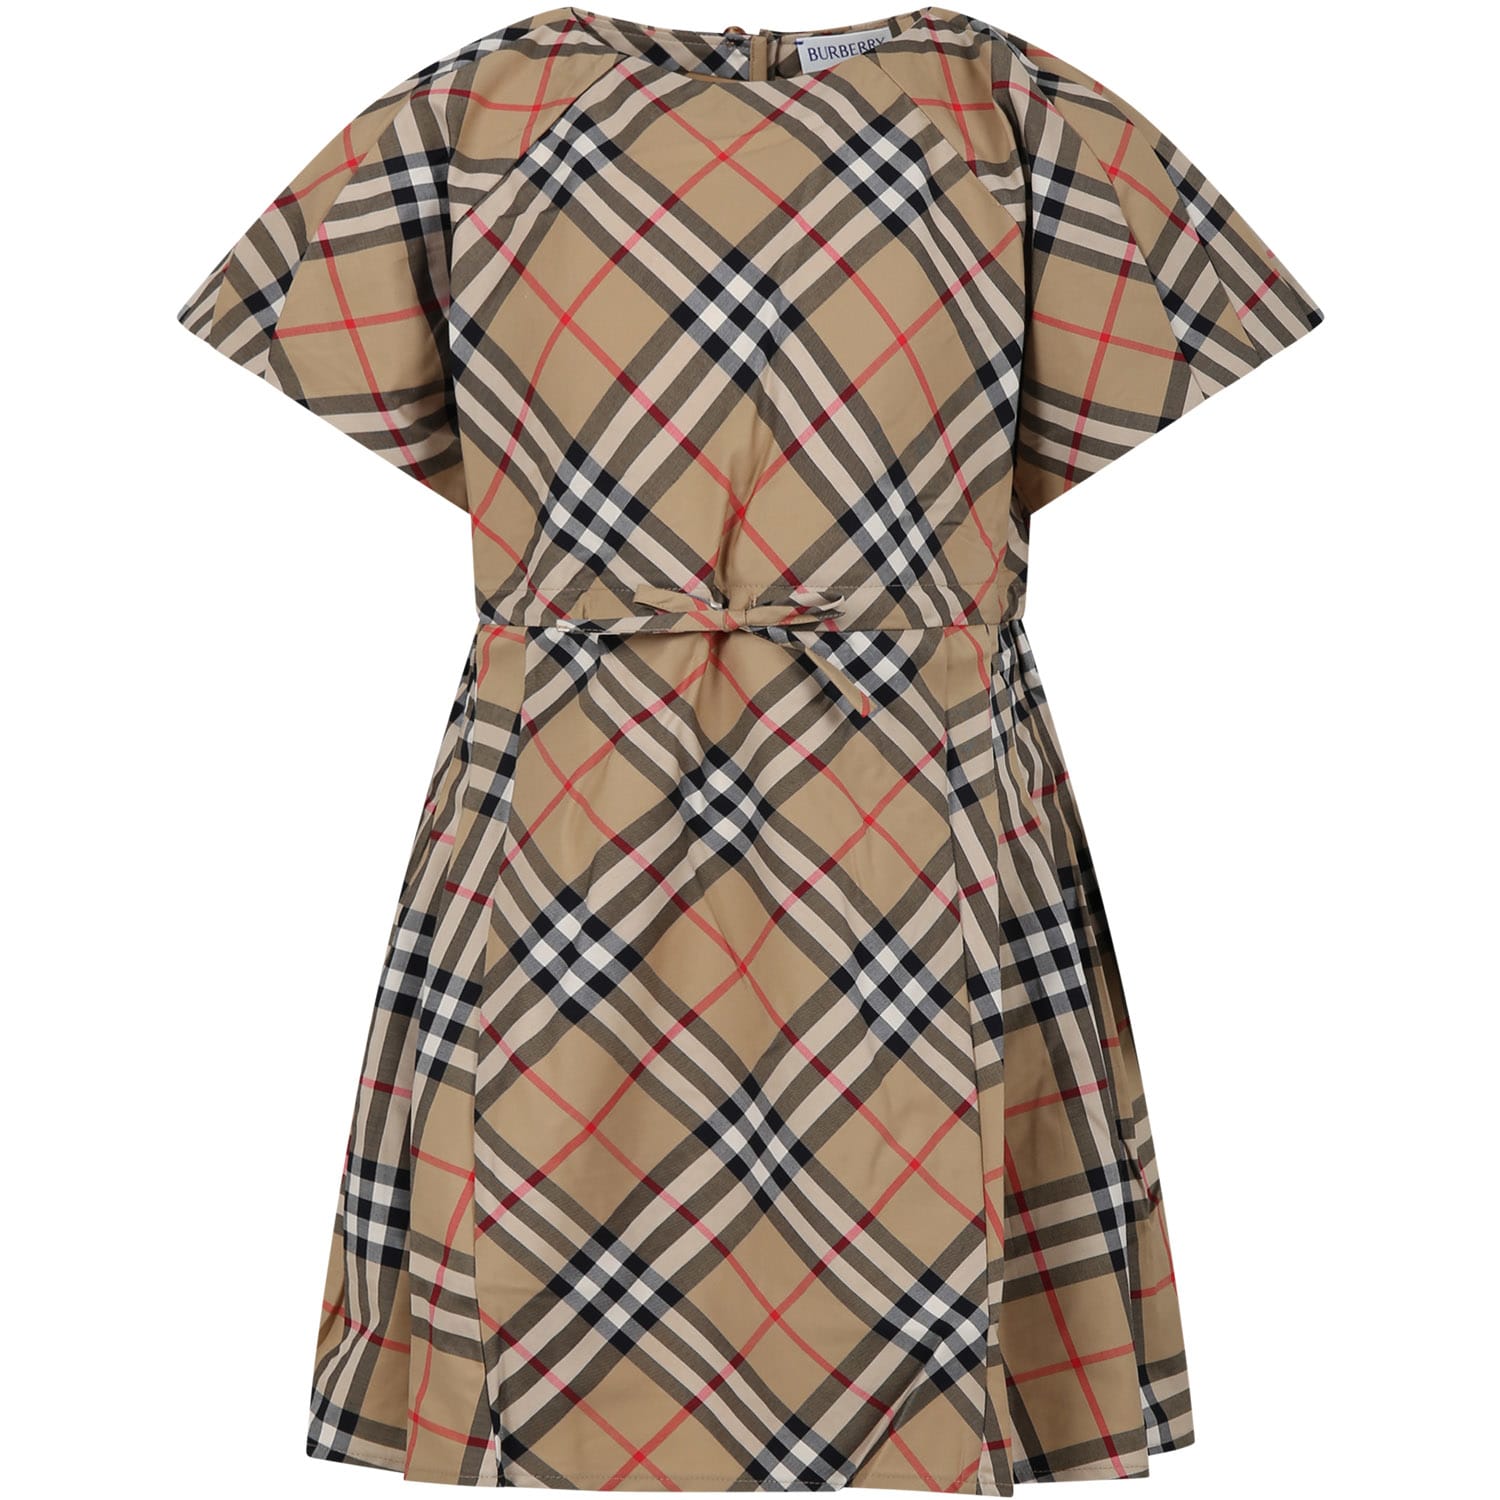 Burberry Kids' Beige Dress For Girl With Iconic All-over Vintage Check